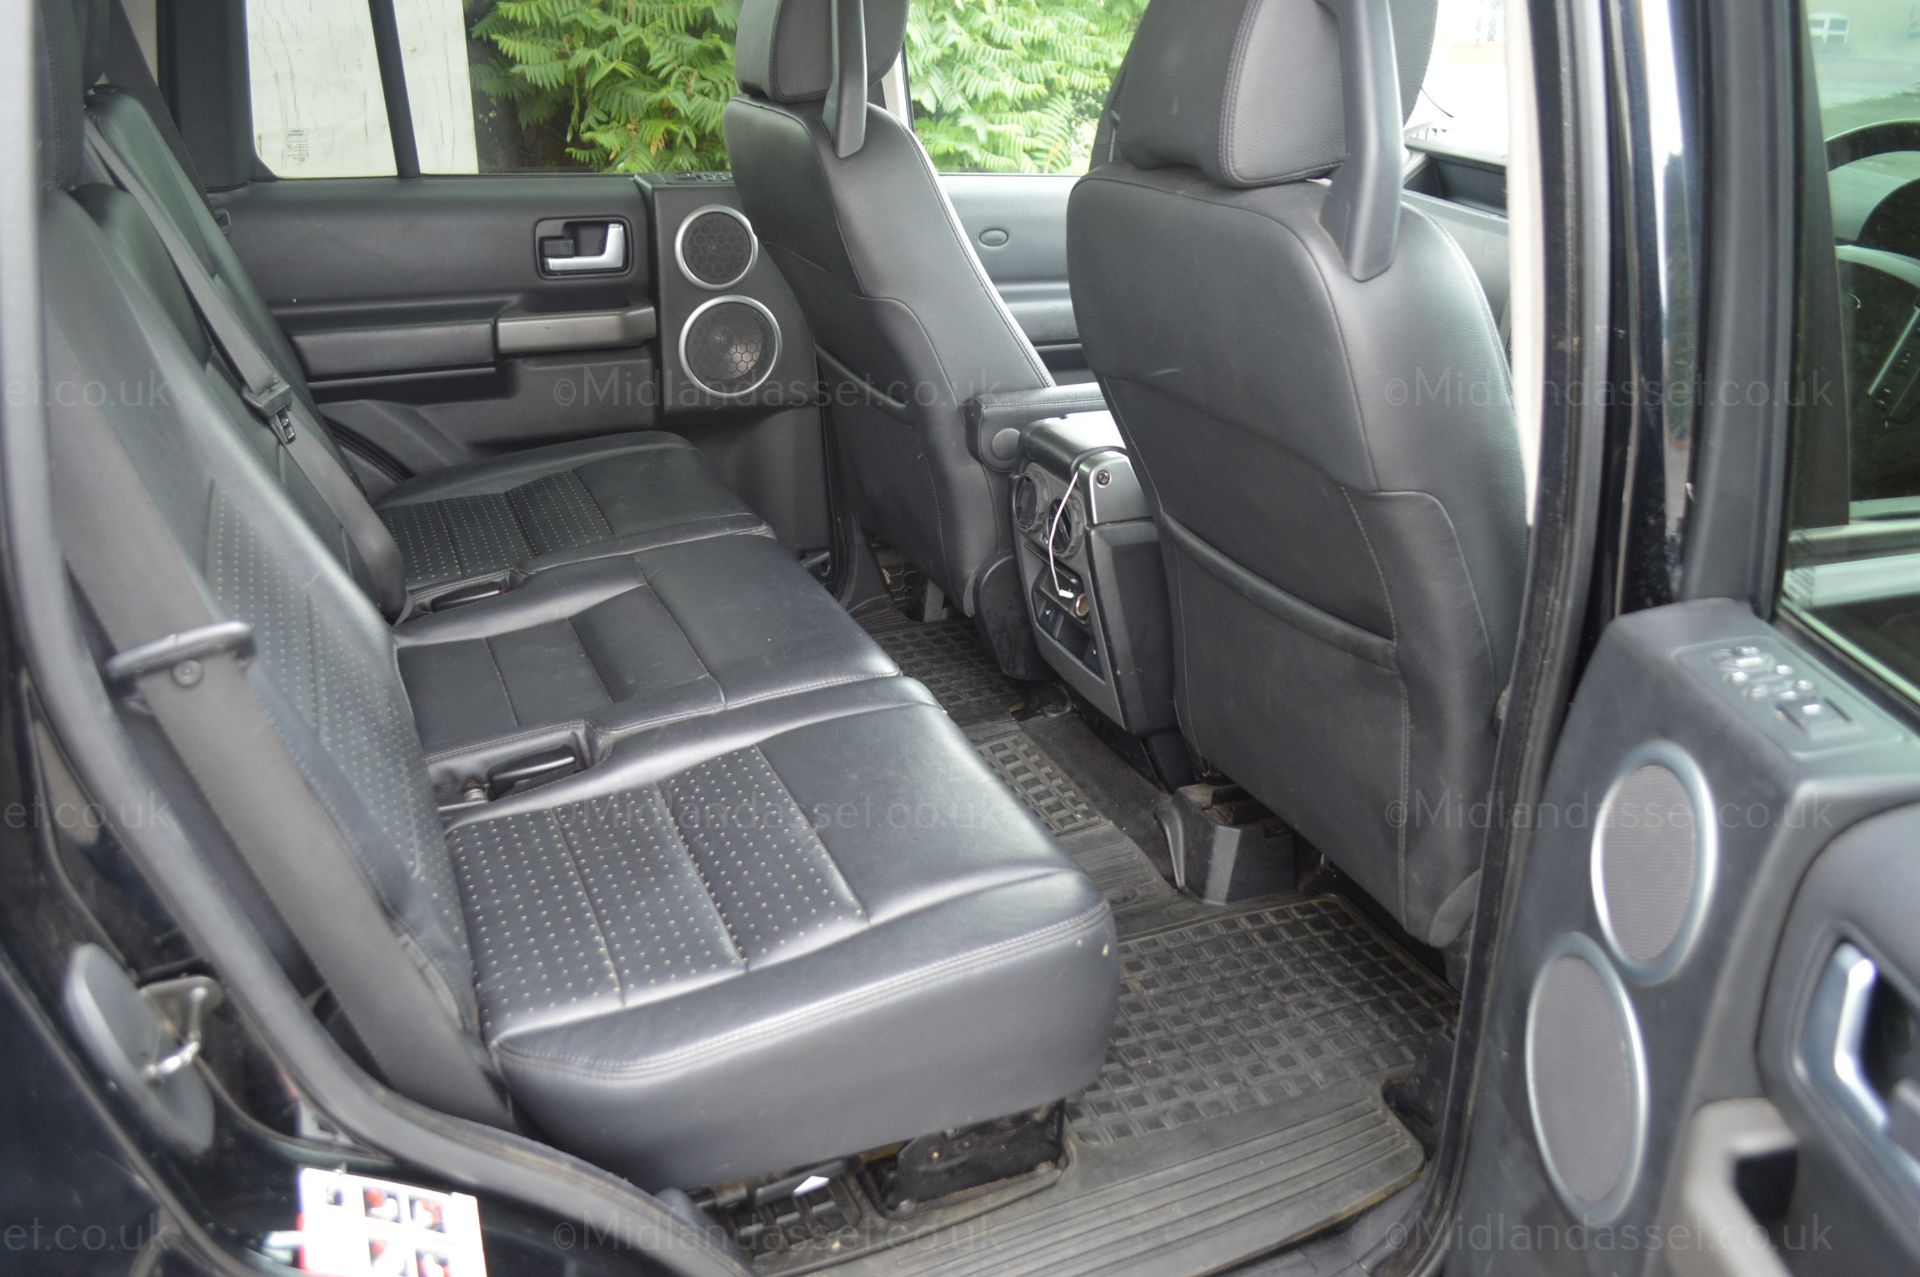 2006/56 REG LAND ROVER DISCOVERY 3 TDV6 HSE AUTO 7 SEAT SERVICE HISTORY - Image 10 of 15